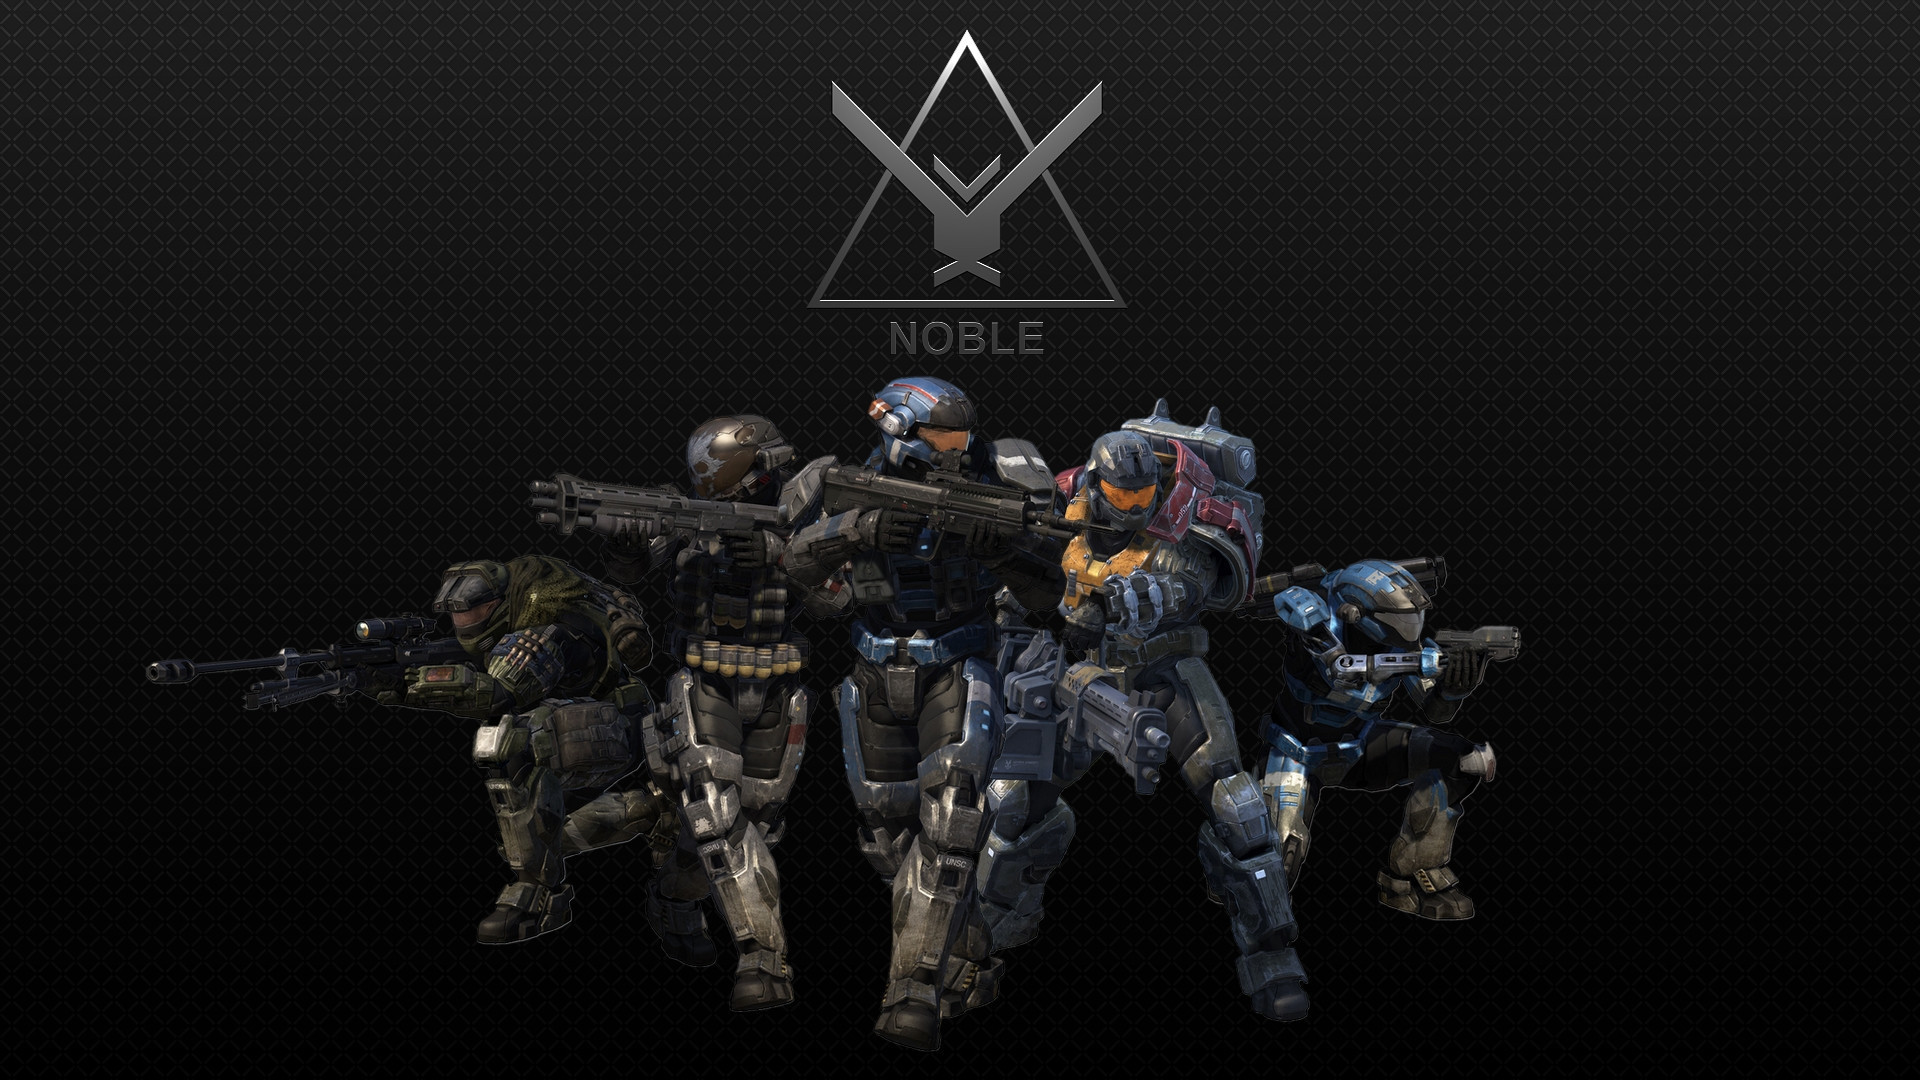 Halo Reach Wallpapers 1080p 77 Background Pictures 1920x1080.